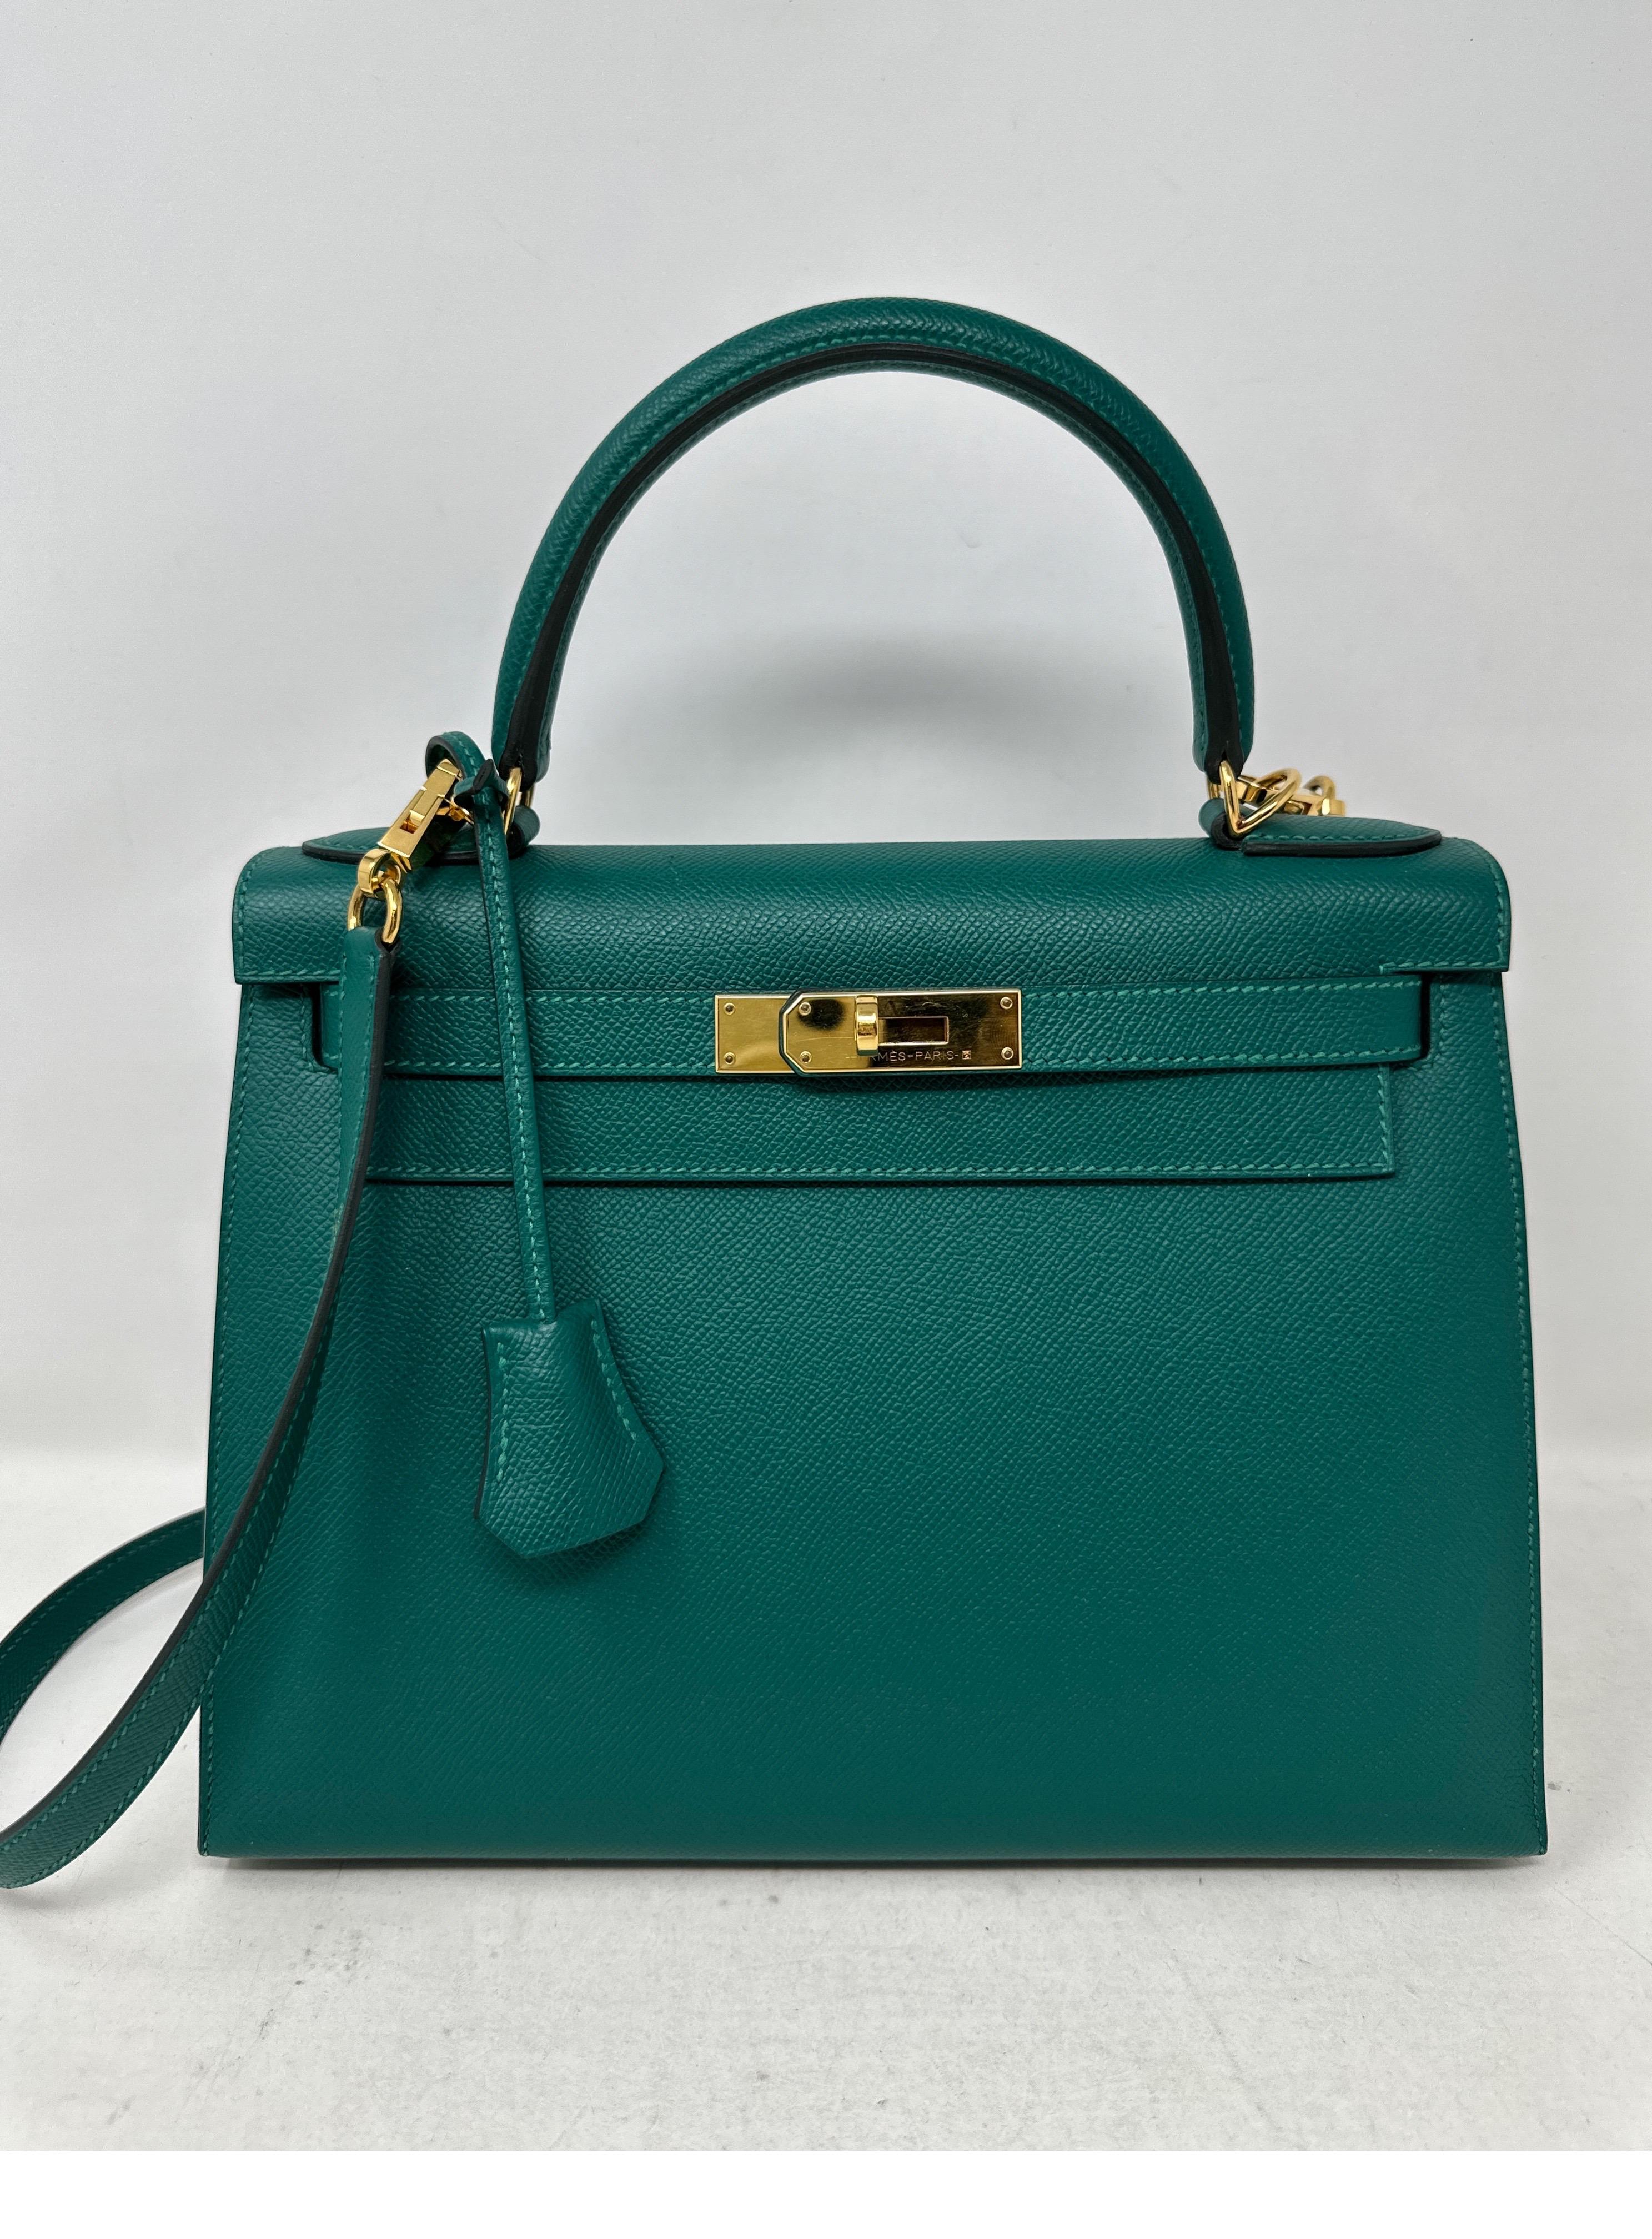 Hermes Malachite Kelly Sellier 28 Bag. Epsom leather. Gold hardware. Pristine like new condition. Interior clean. Rare color and most wanted size. Includes clochette, lock, keys, and dust bag. Guaranteed authentic. Beautiful bag. Don't miss out. 